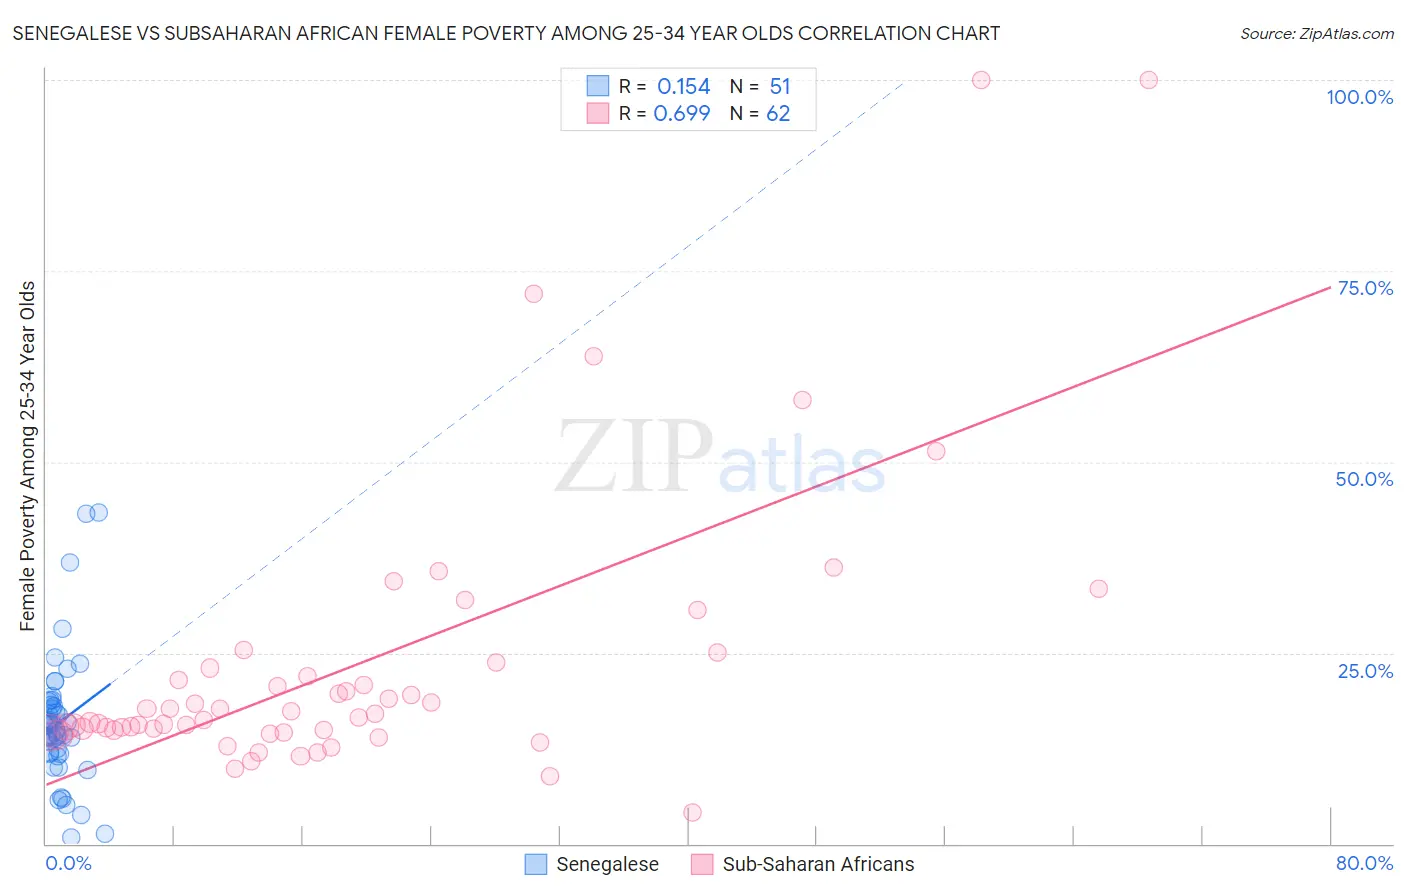 Senegalese vs Subsaharan African Female Poverty Among 25-34 Year Olds